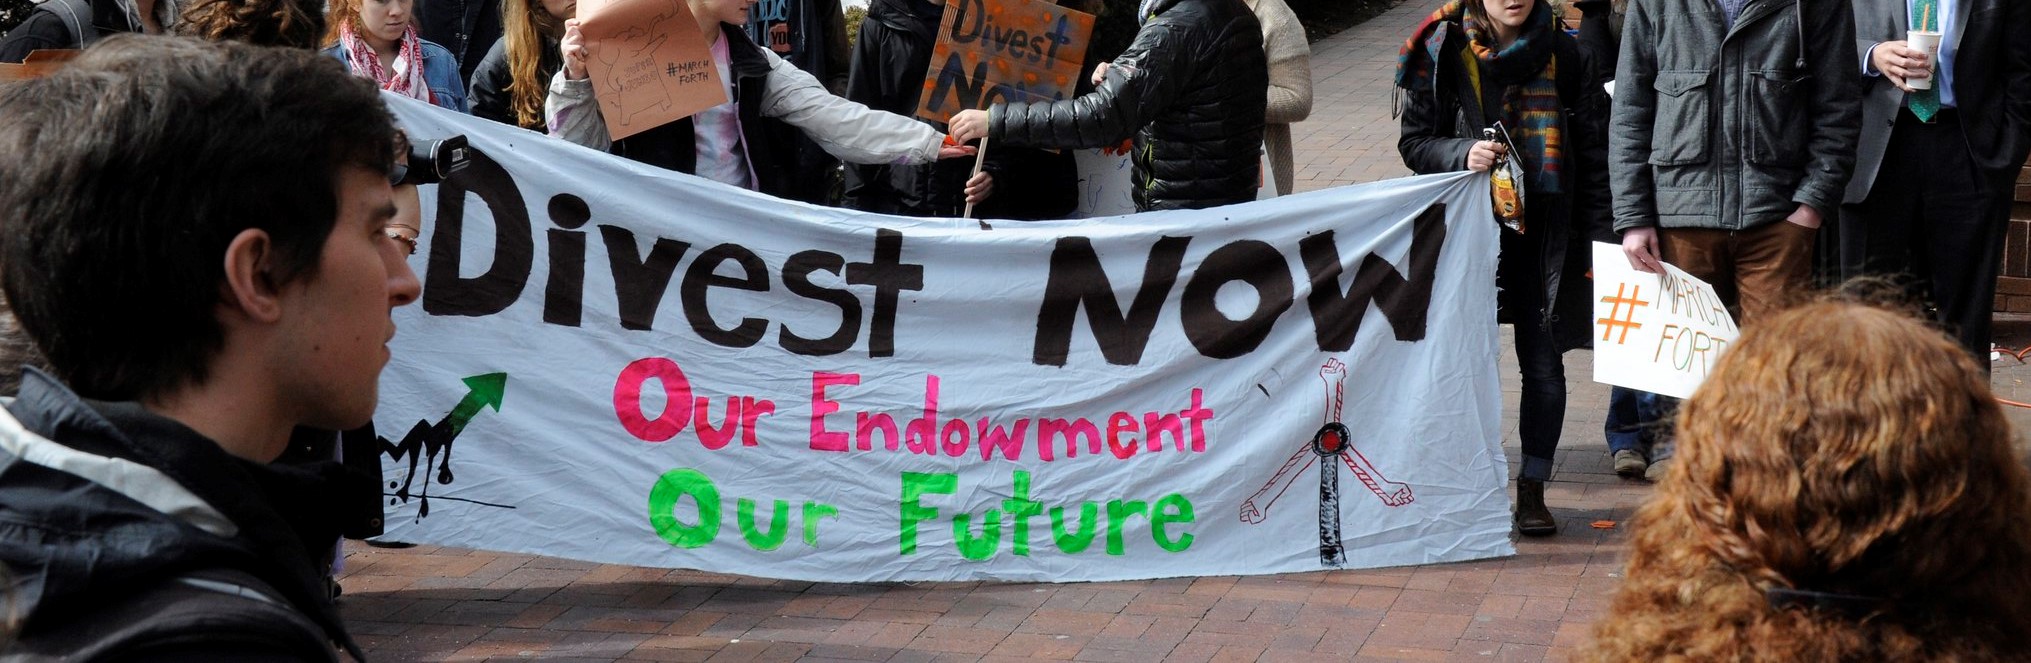 Banner at a rally: "Dives. Our endowment, our future."t now